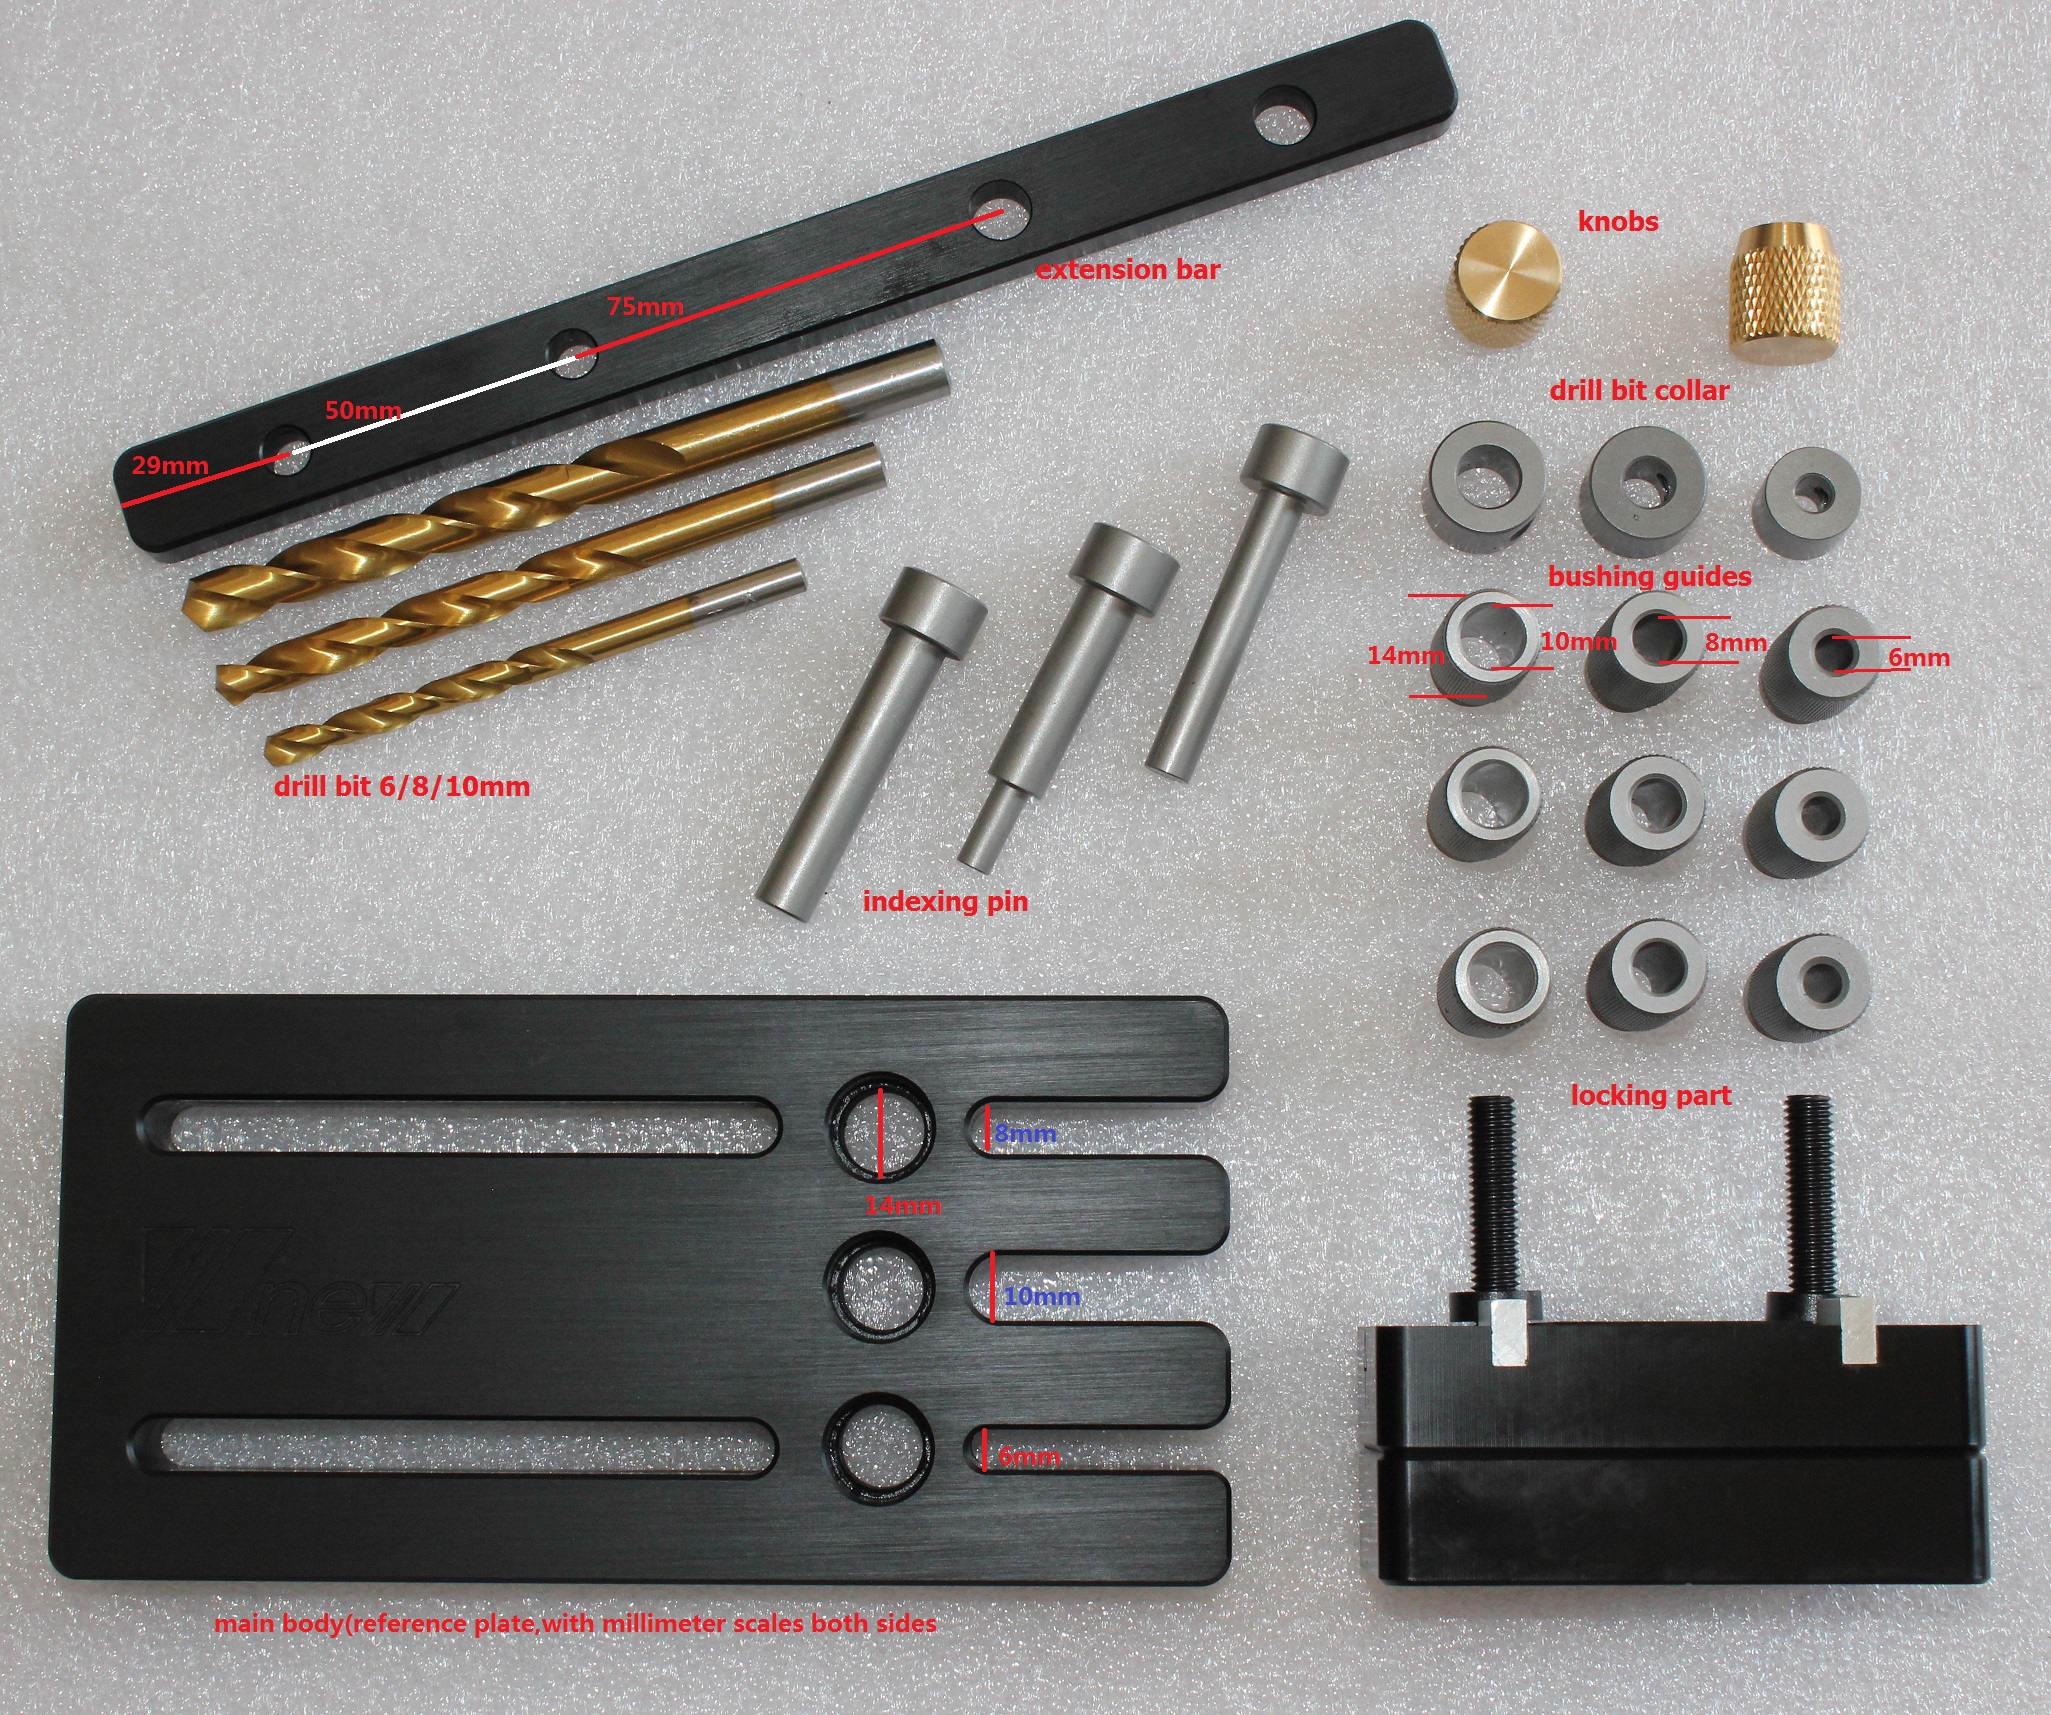 Dowelling jig master kit for 6/8/10mm dowels - Click Image to Close